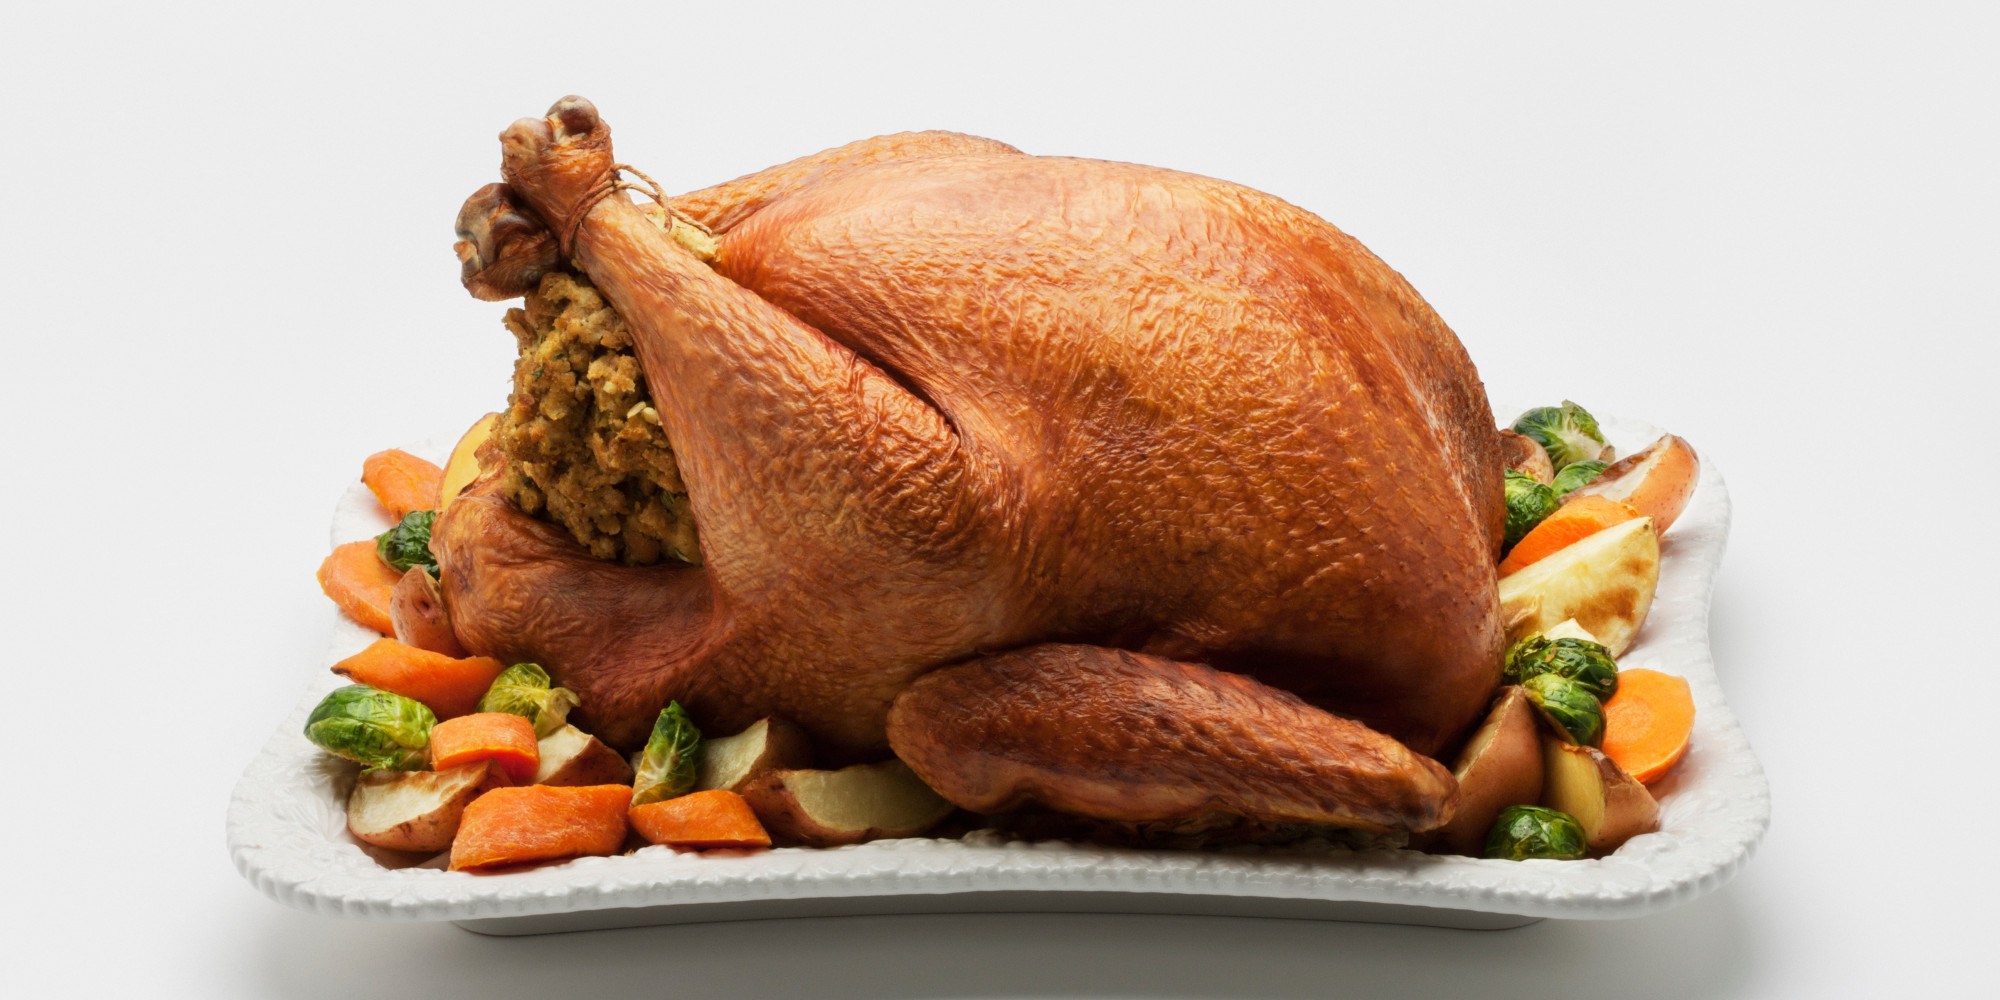 Small Thanksgiving Turkey
 Tryptophan Making You Sleepy Is A Big Fat Lie